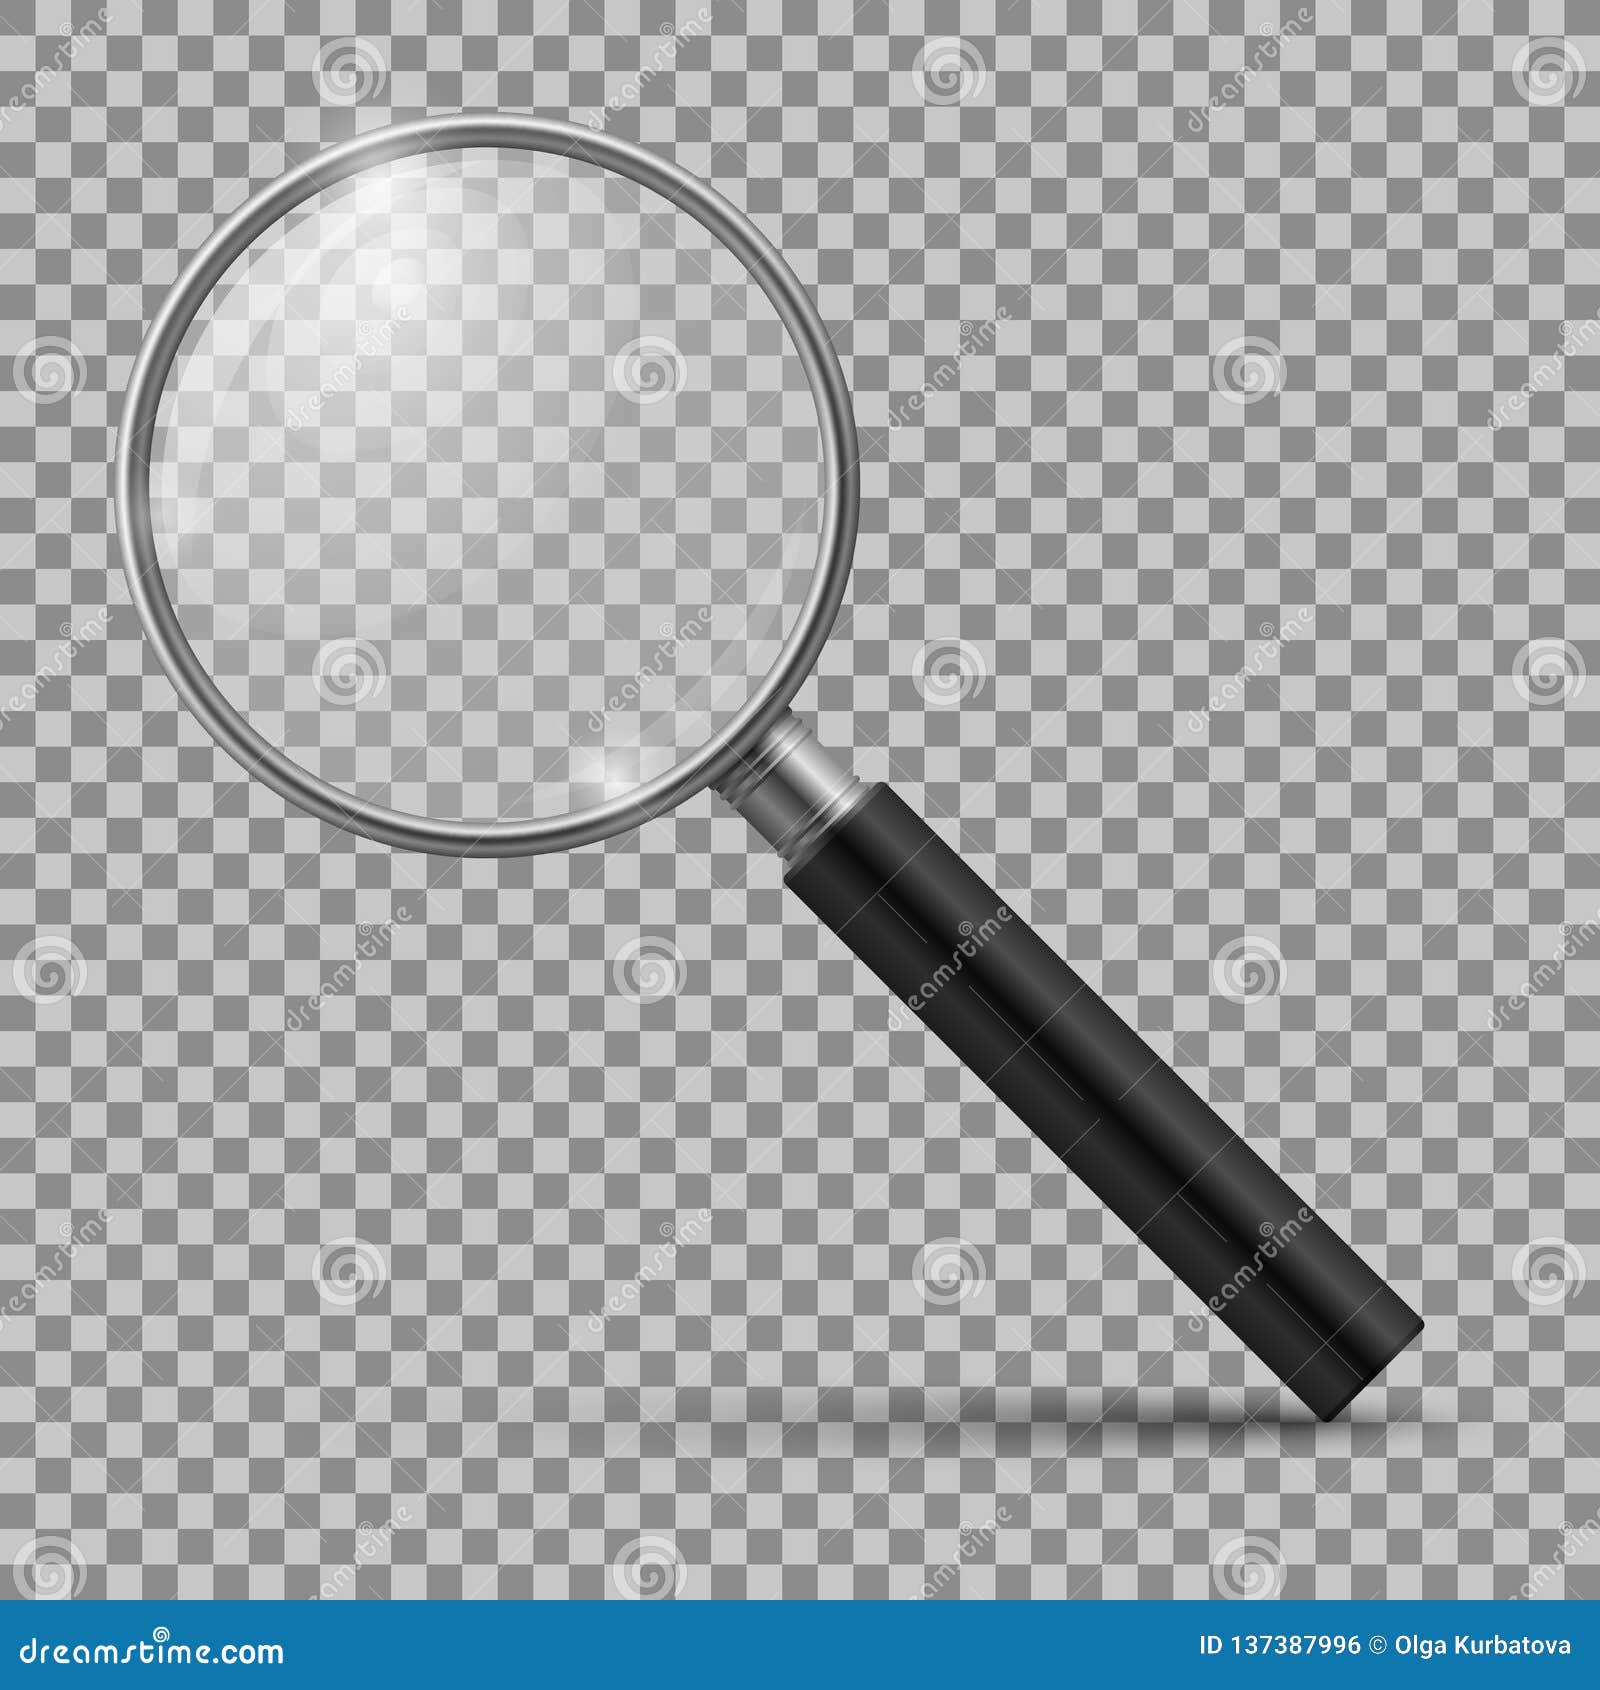 realistic magnifying glass. magnification zoom loupe, scrutiny microscope magnify lens. detective tool  mockup